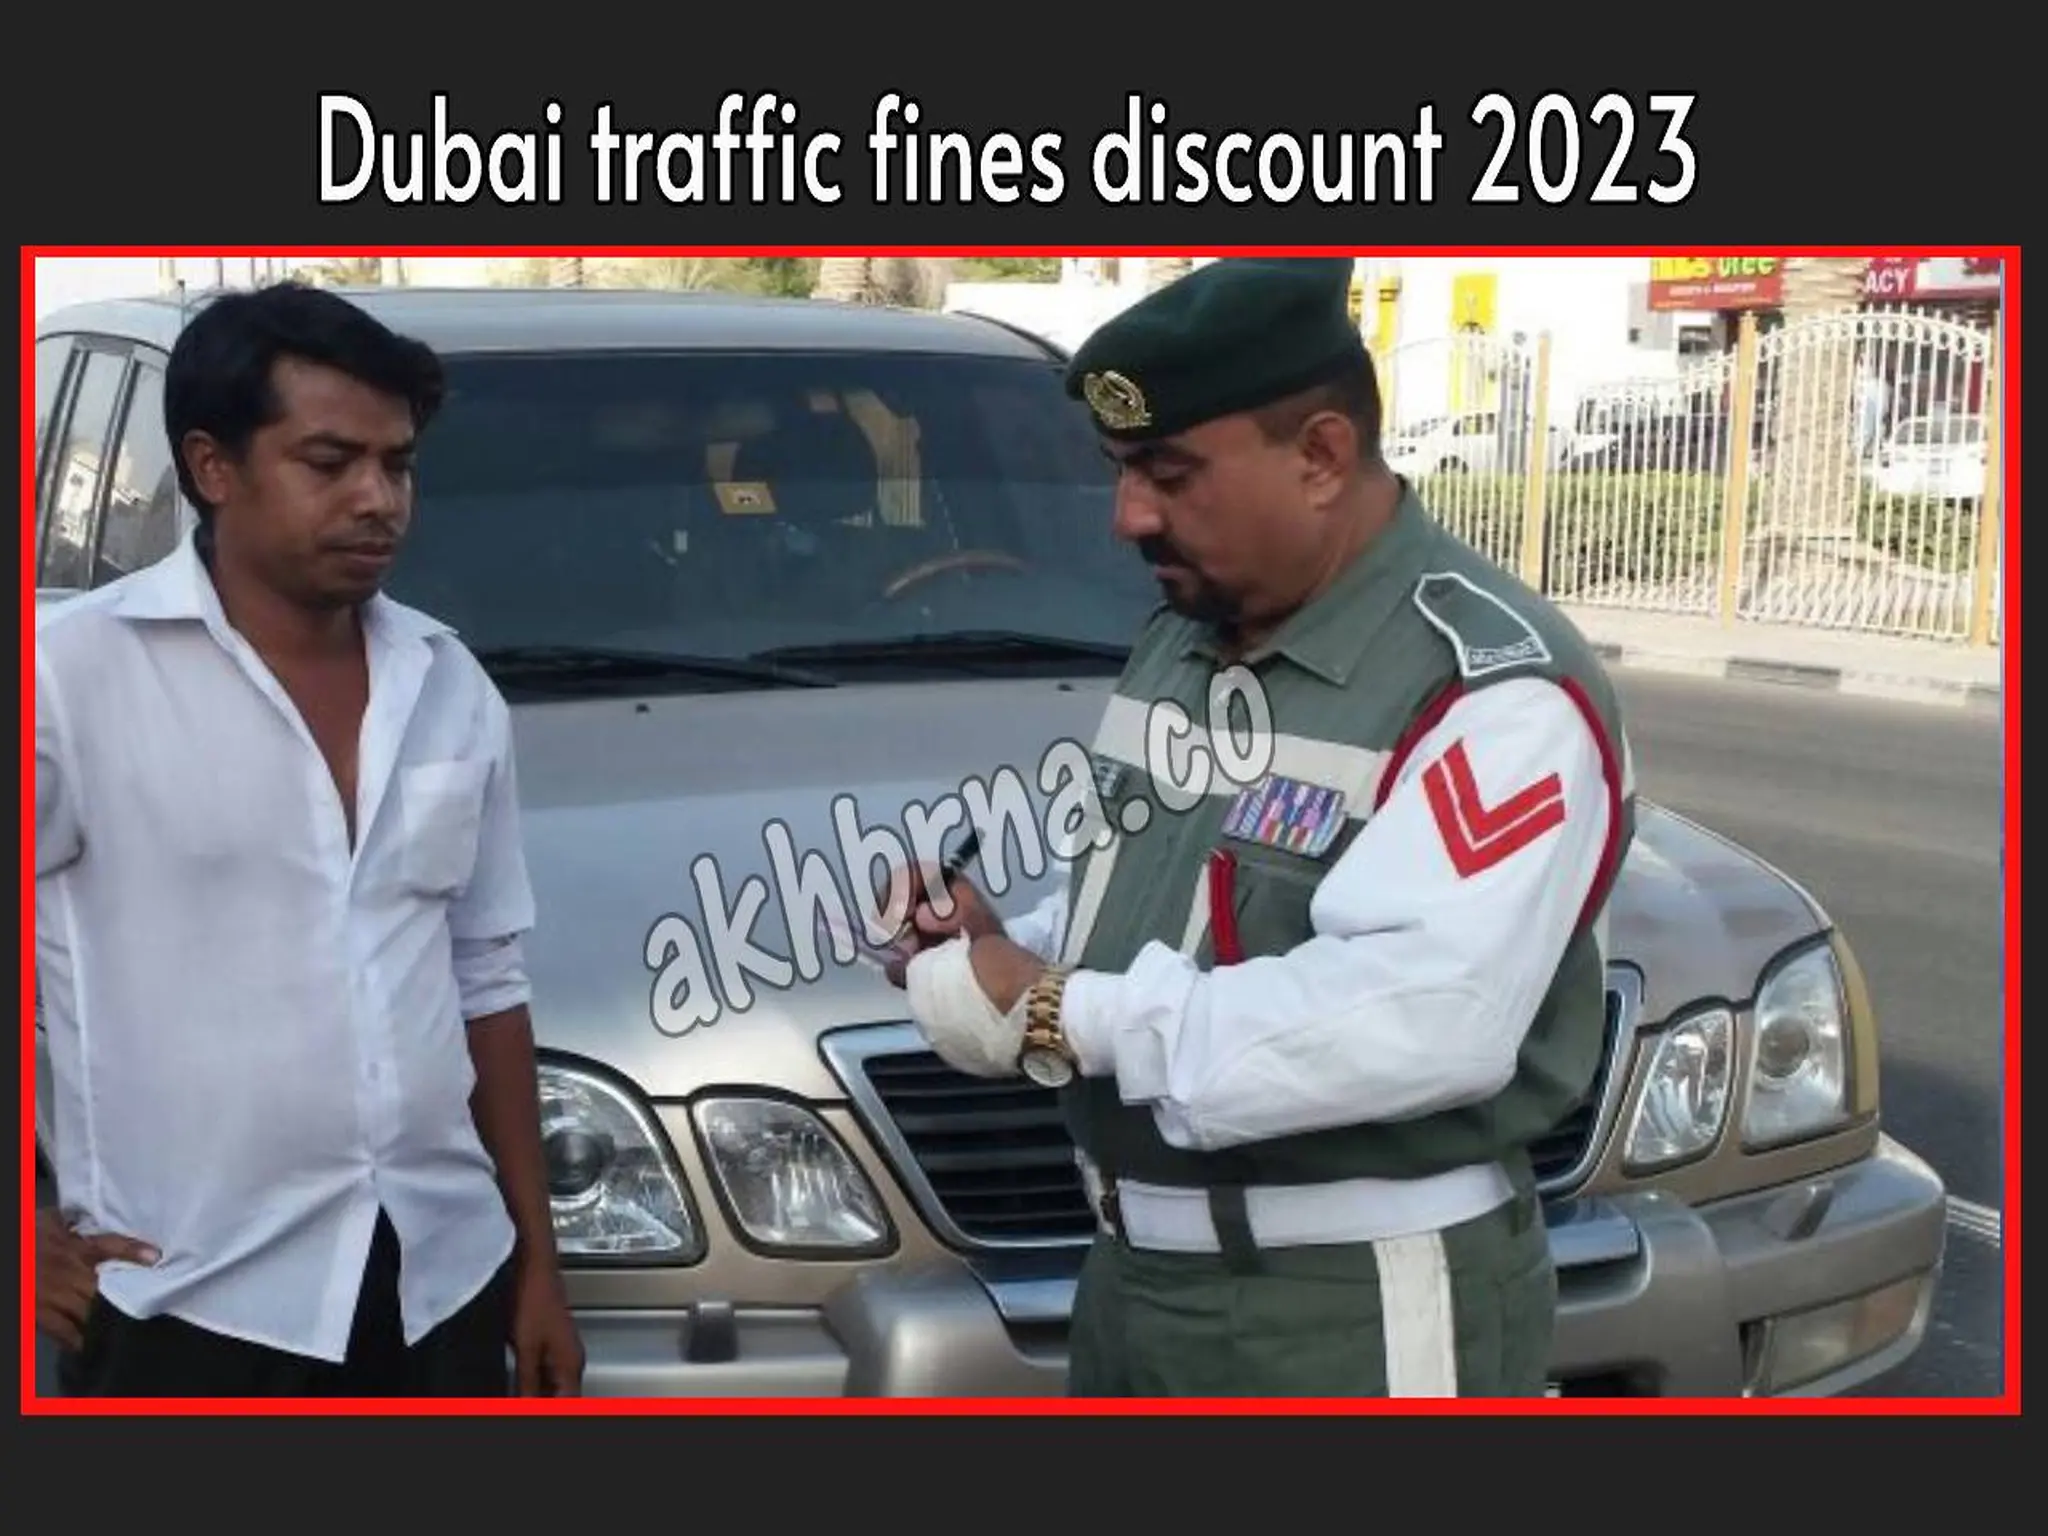 Link Submit a Request for Dubai Traffic Fines Discount 2023